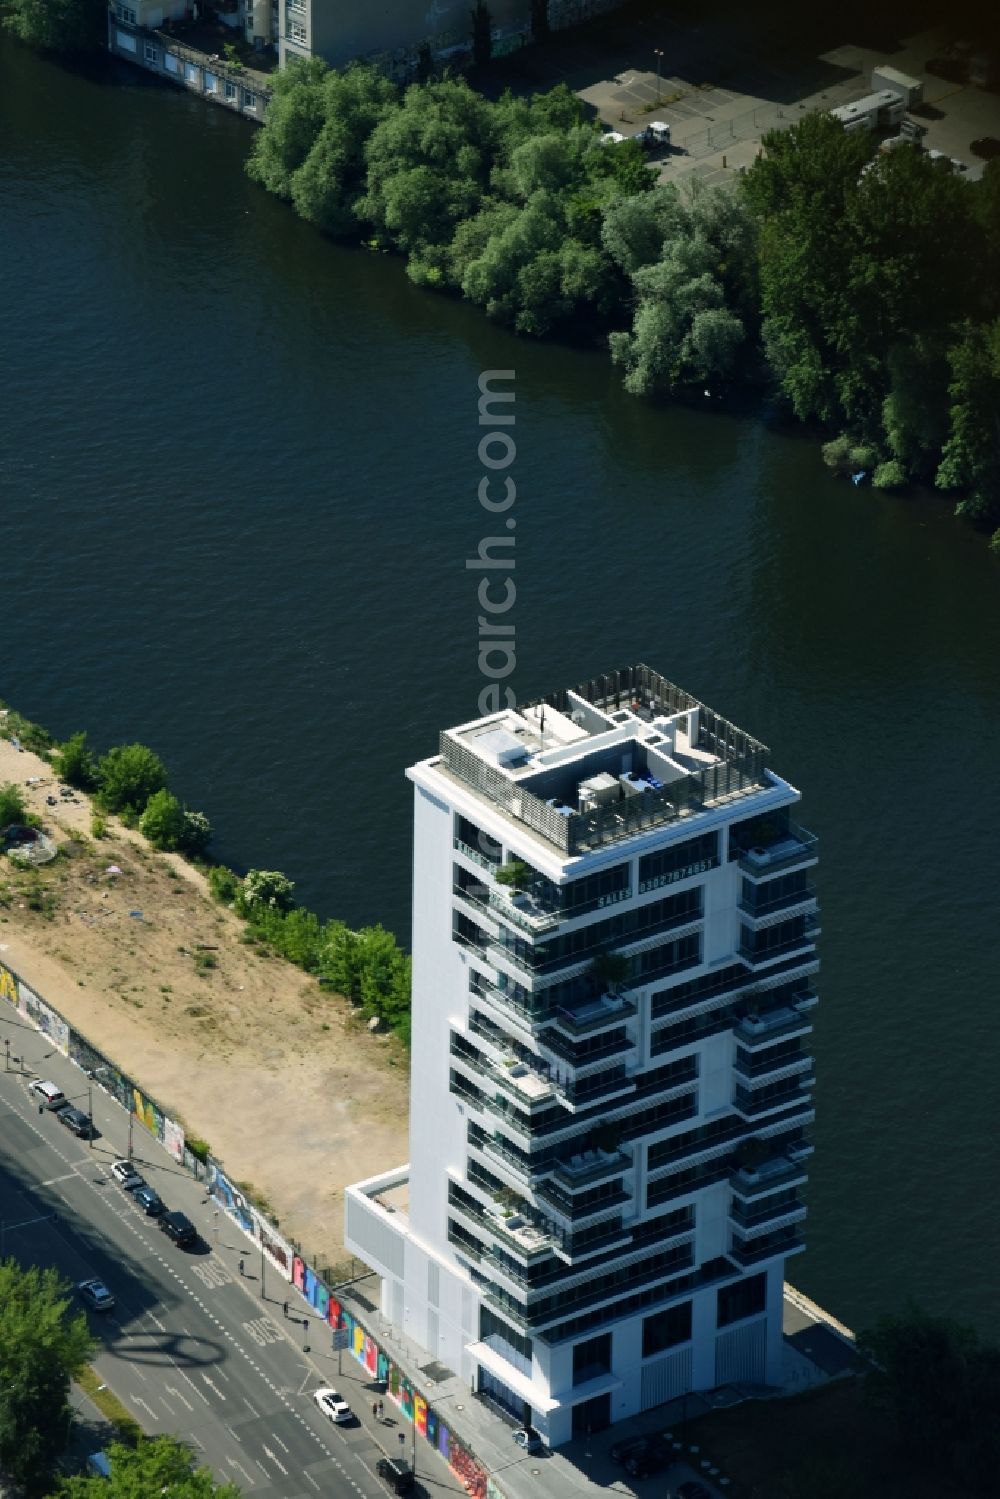 Berlin from above - Project Living Levels at Muhlenstrasse on the banks of the River Spree in Berlin - Friedrichshain. On the grounds of the Berlin Wall border strip at the EastSideGallery, the company Living Bauhaus is building a futuristic high-rise residential. The real estate service company City & Home GmbH manages the available apartments